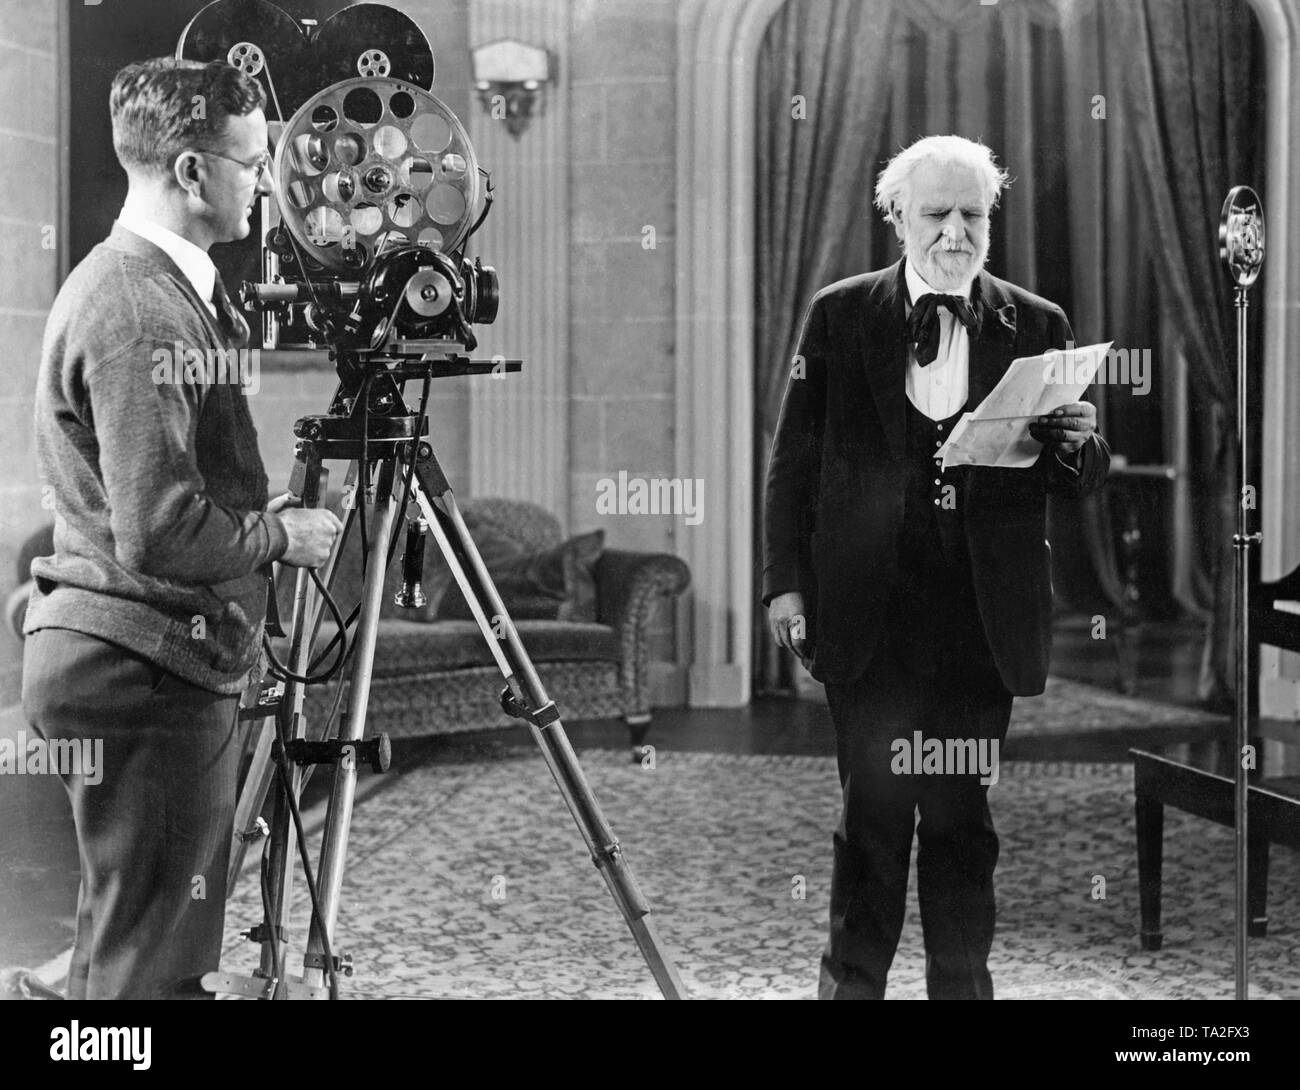 The poet Edwin Markham is filmed in the Dr. Forest Studios reciting his poems 'Man with the Hoe' and 'Lincoln'. These poems were later inserted into a documentary shown by the Smithsonian Institute. Present were Dr. Lee and Dr. Forest, Chauncey Deprew, Dr. Chas W. Elliot, Elihu Root, President Coolidge and later Senator Robert La Follette. Stock Photo